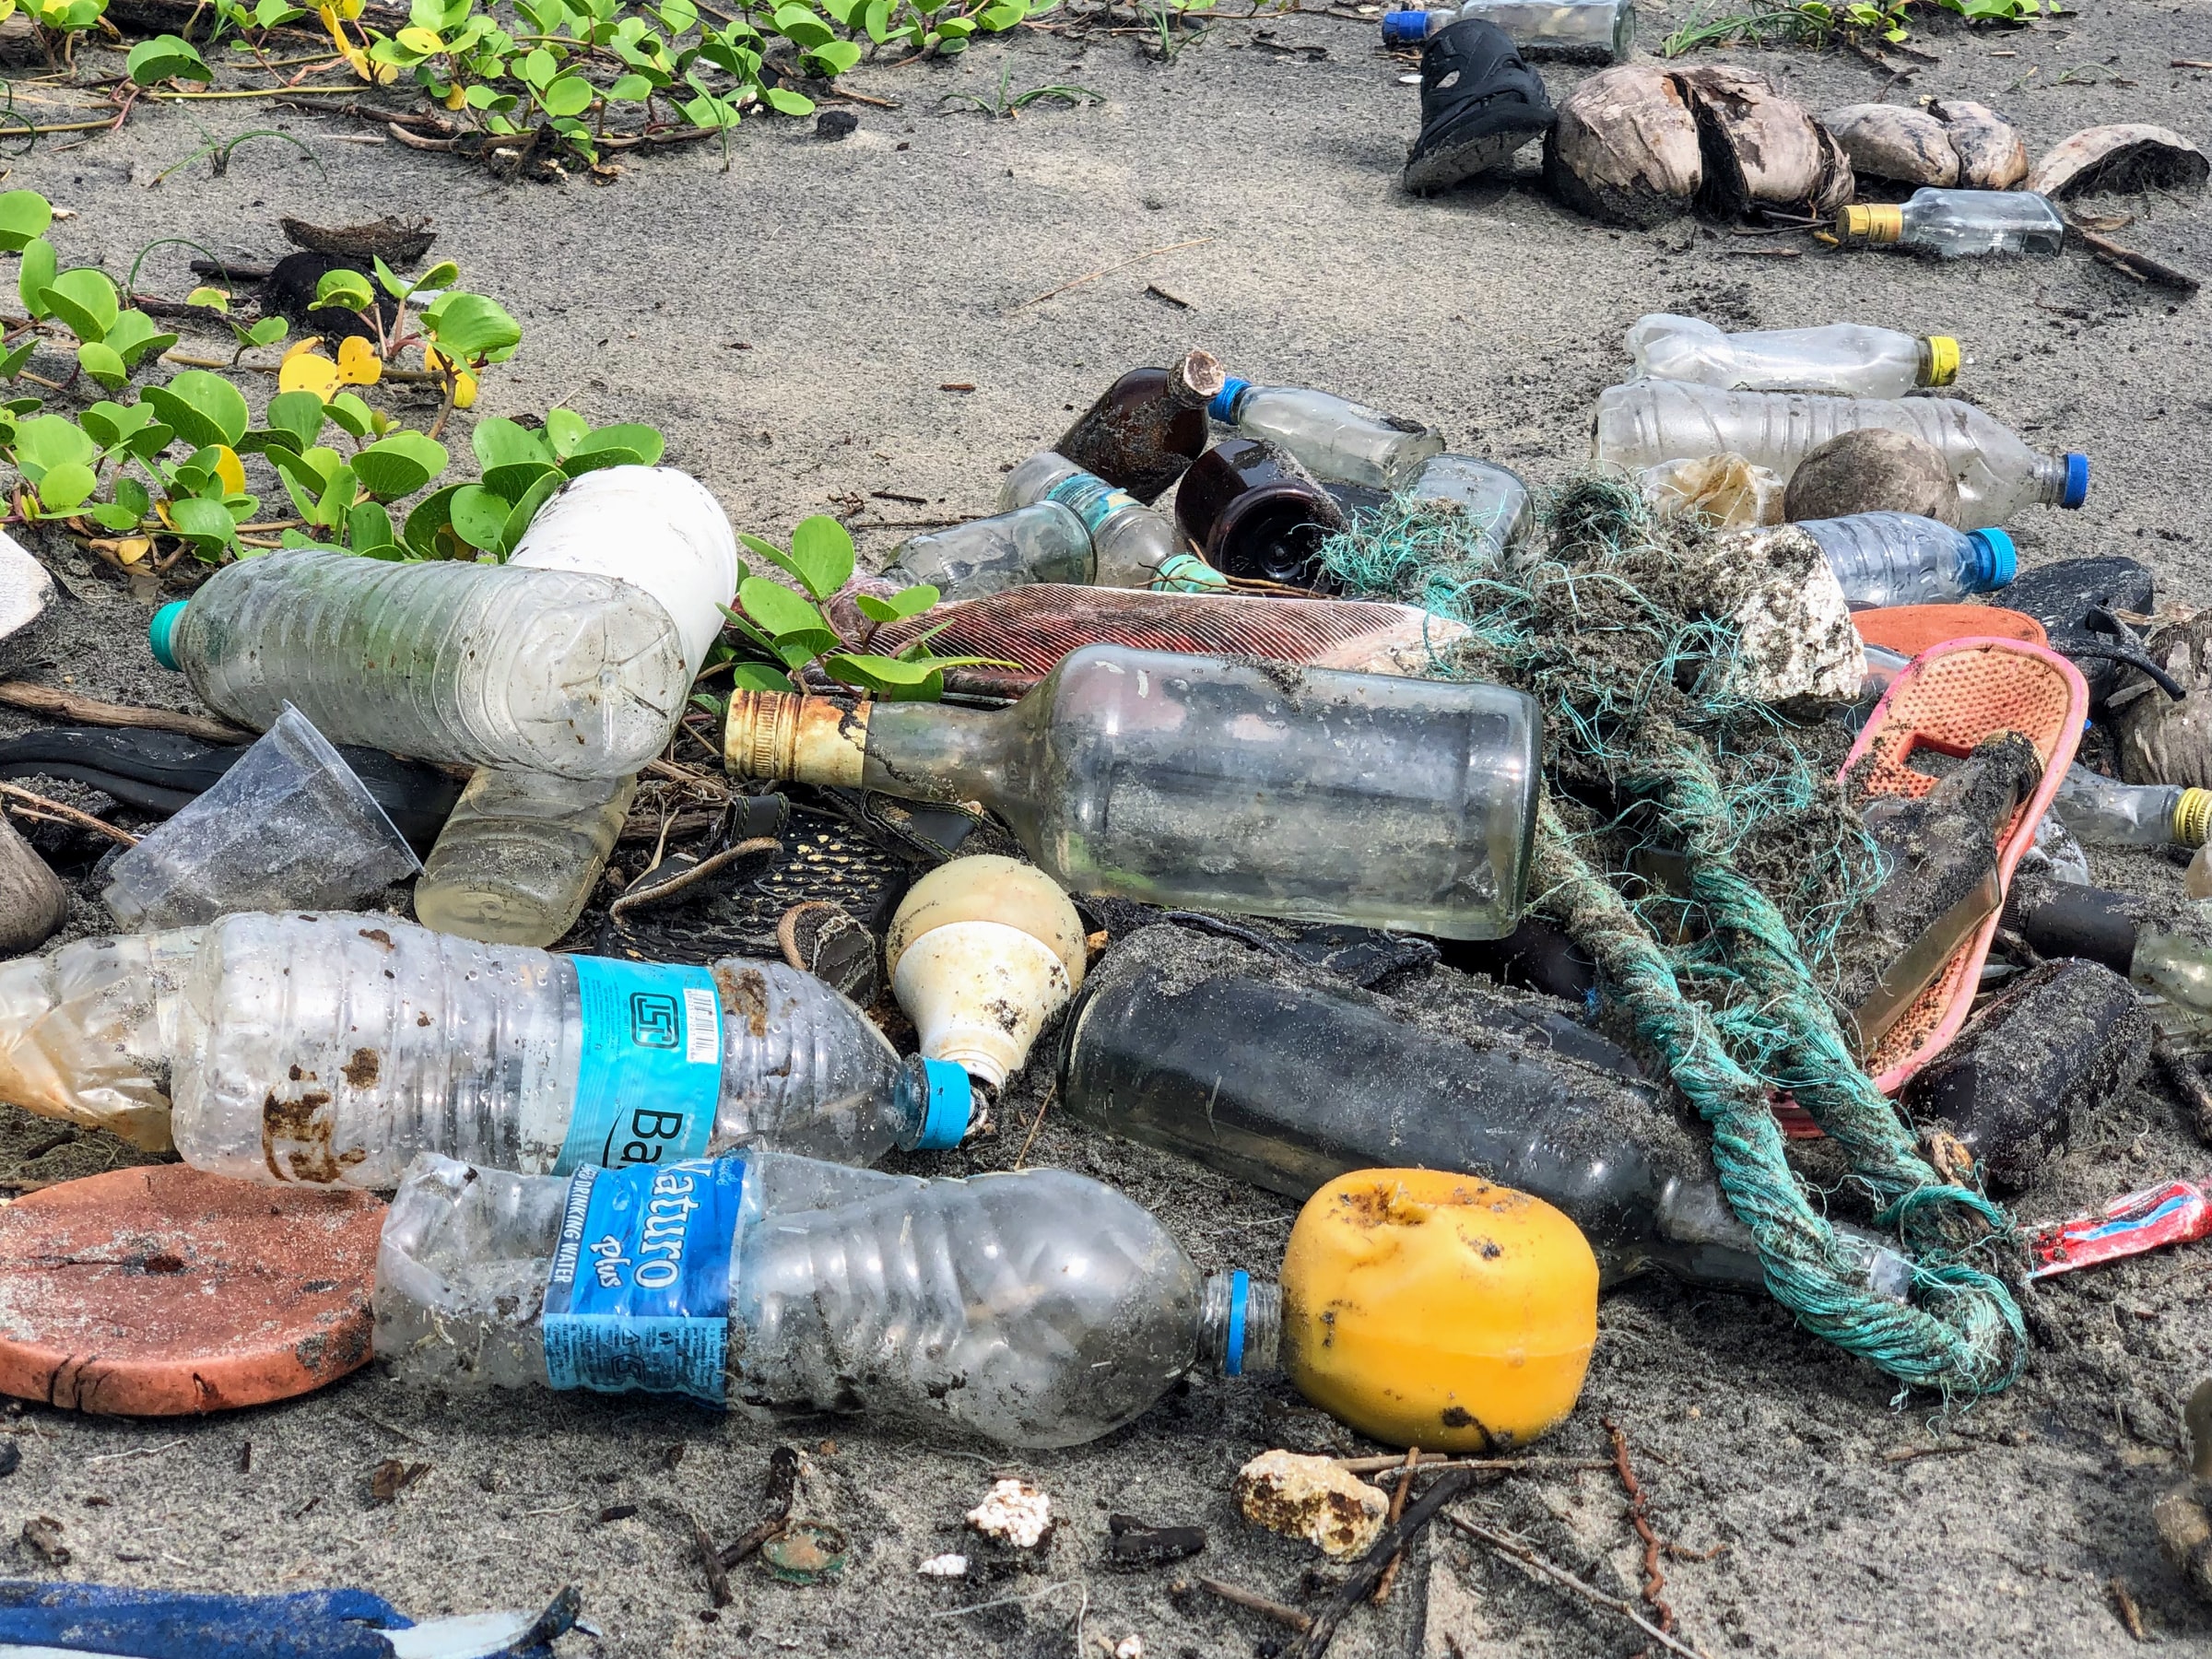 plastic water bottles littered on a sandy beach surrounded by small green plants